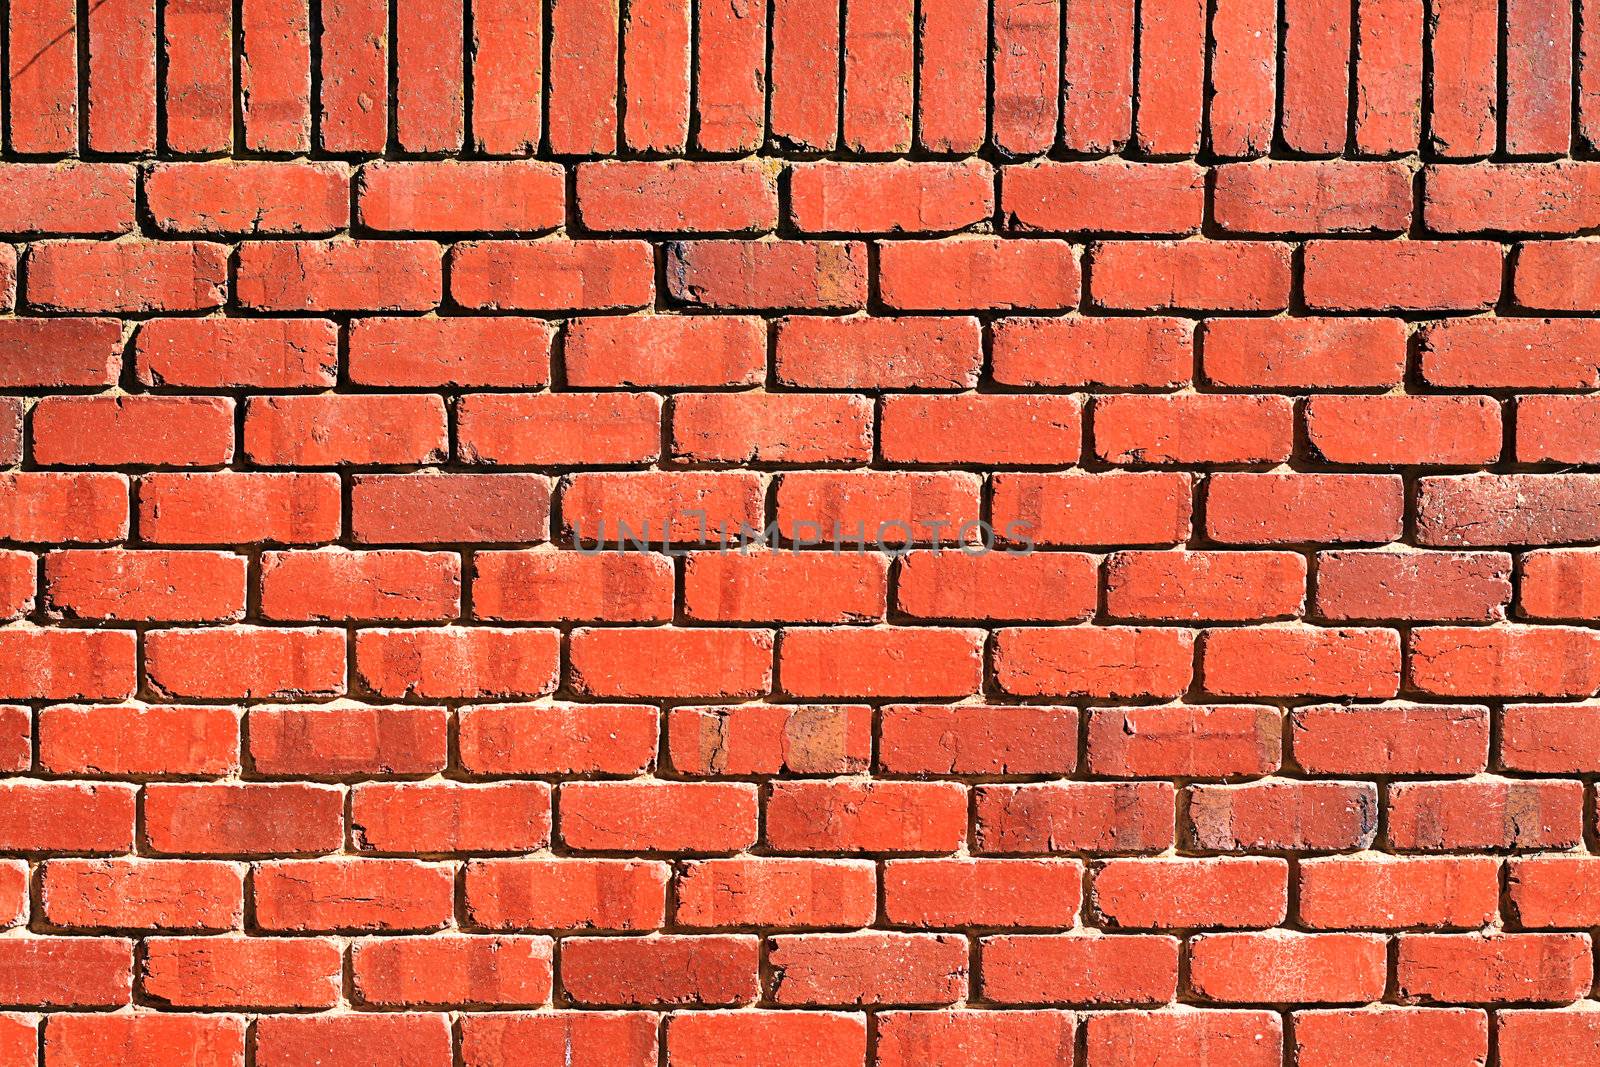 Background Texture: Red Brick Wall with Perpendicular Top Row